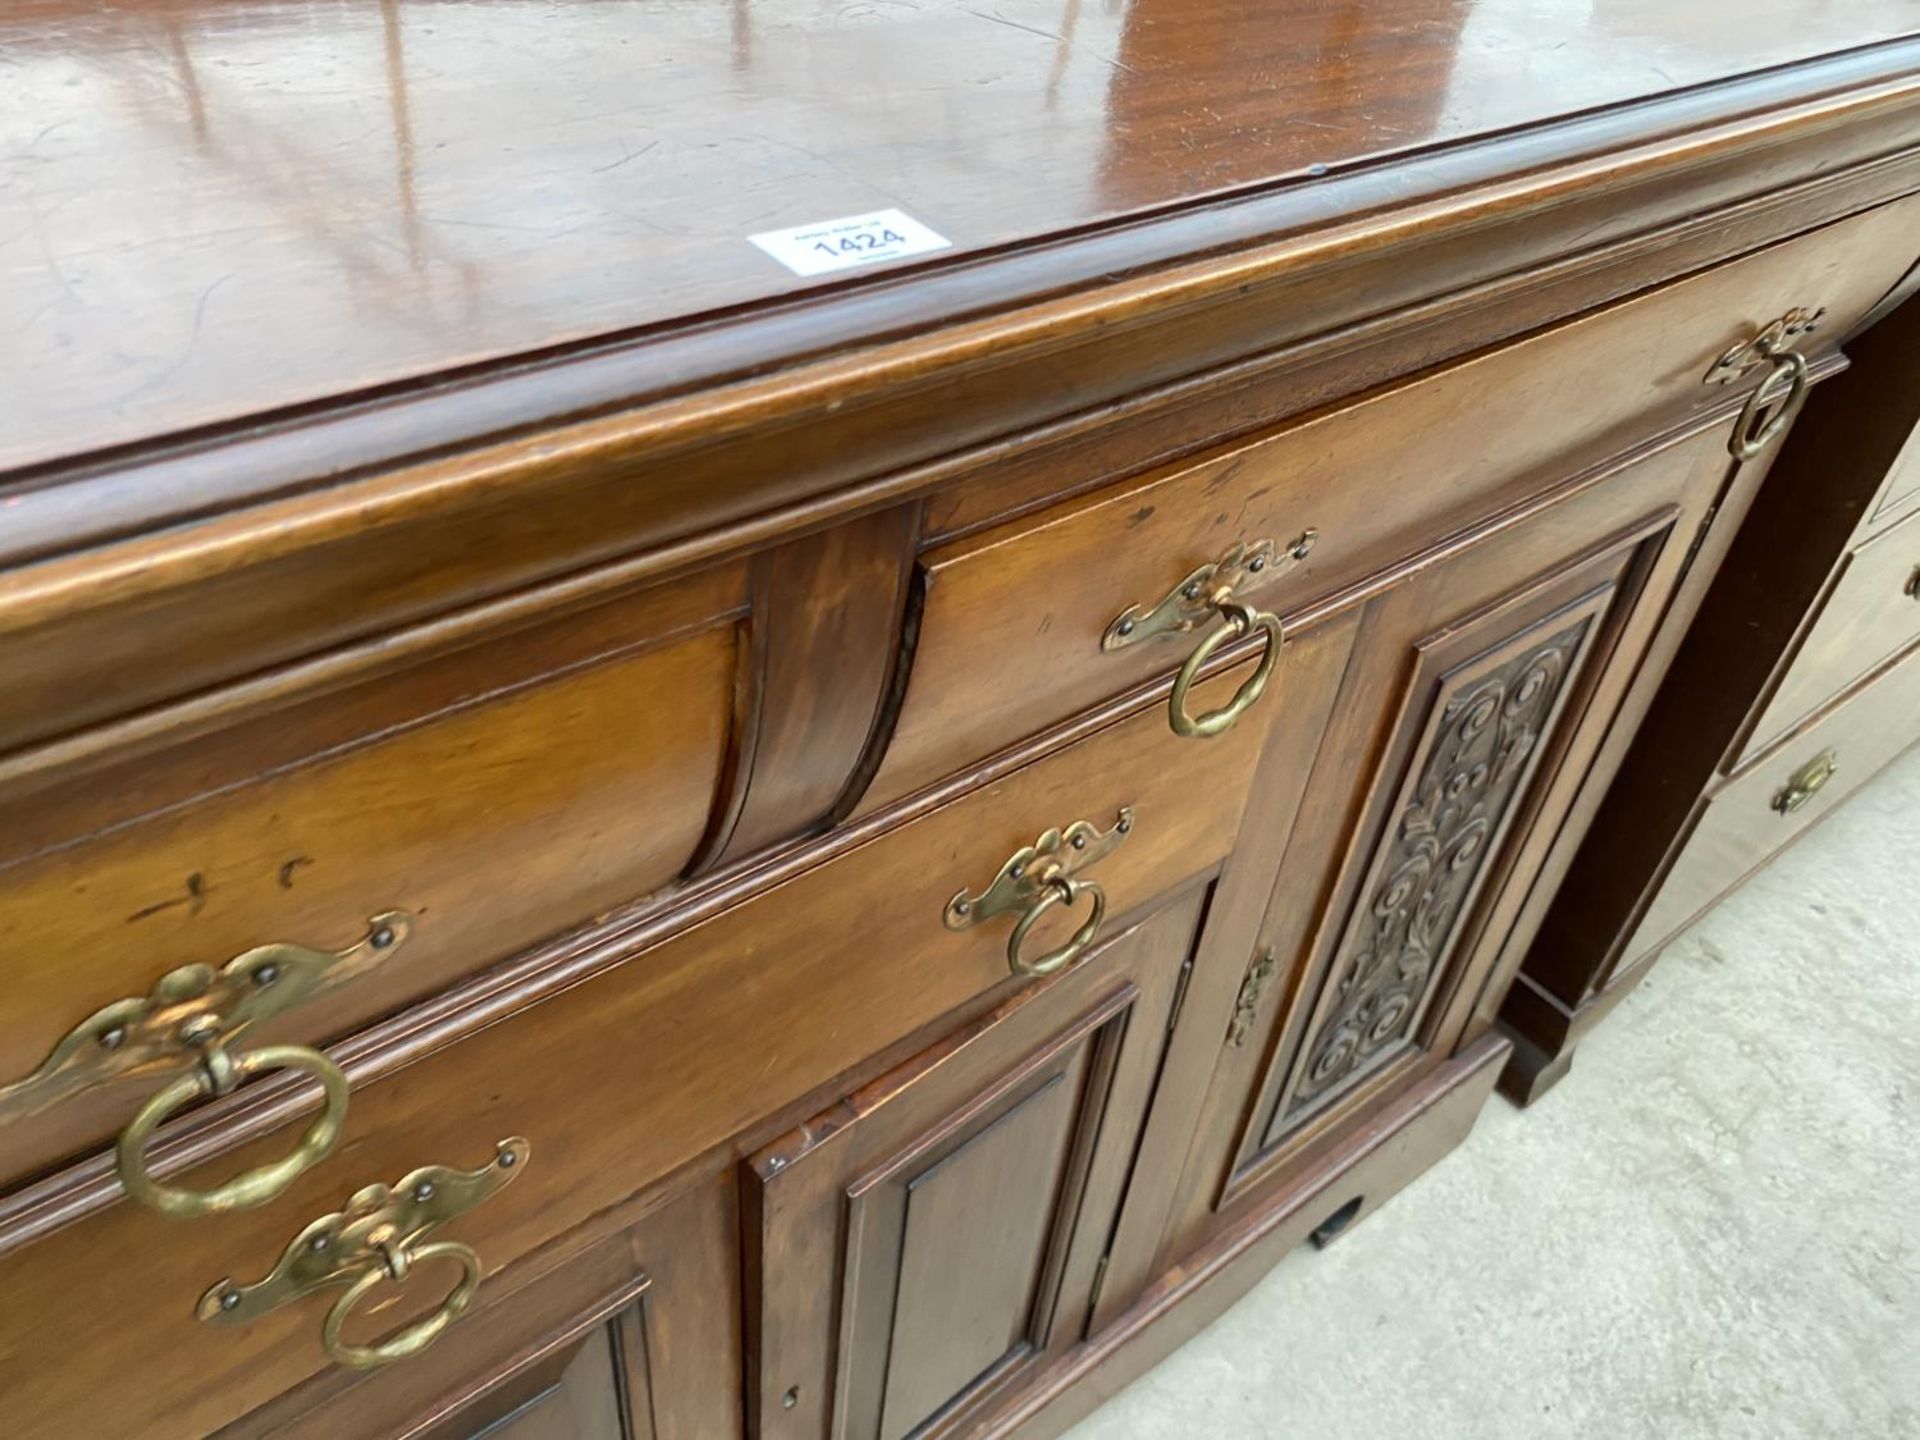 A MAHOGANY SIDEBOARD WITH FOUR DOORS AND THREE DRAWERS - Image 4 of 4